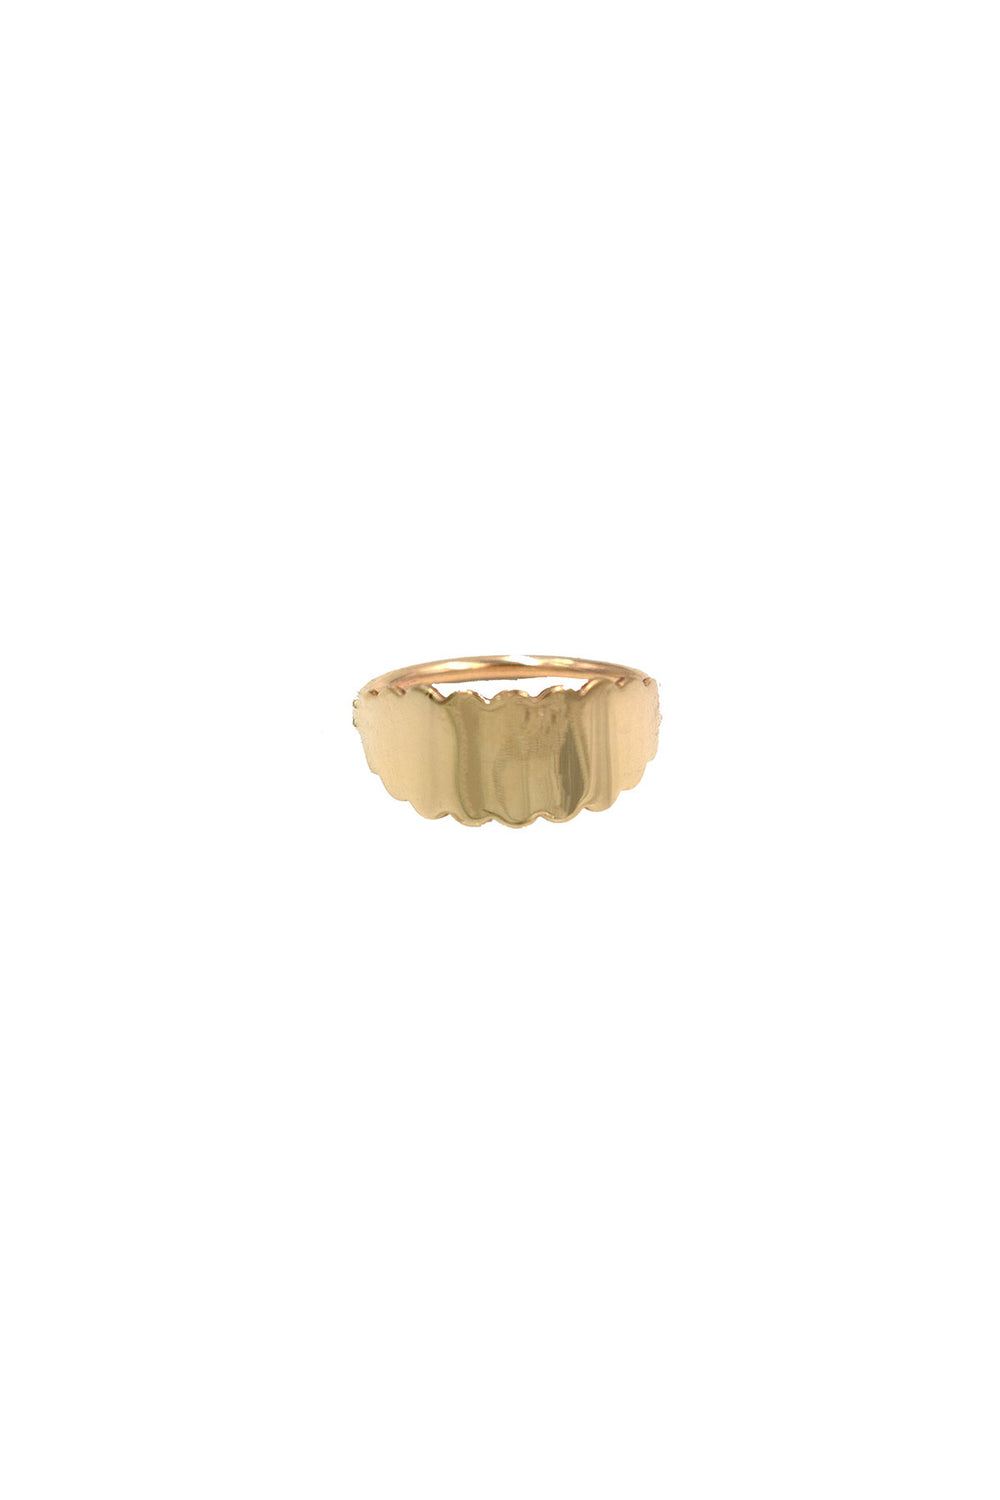 Gold Cloud Ring